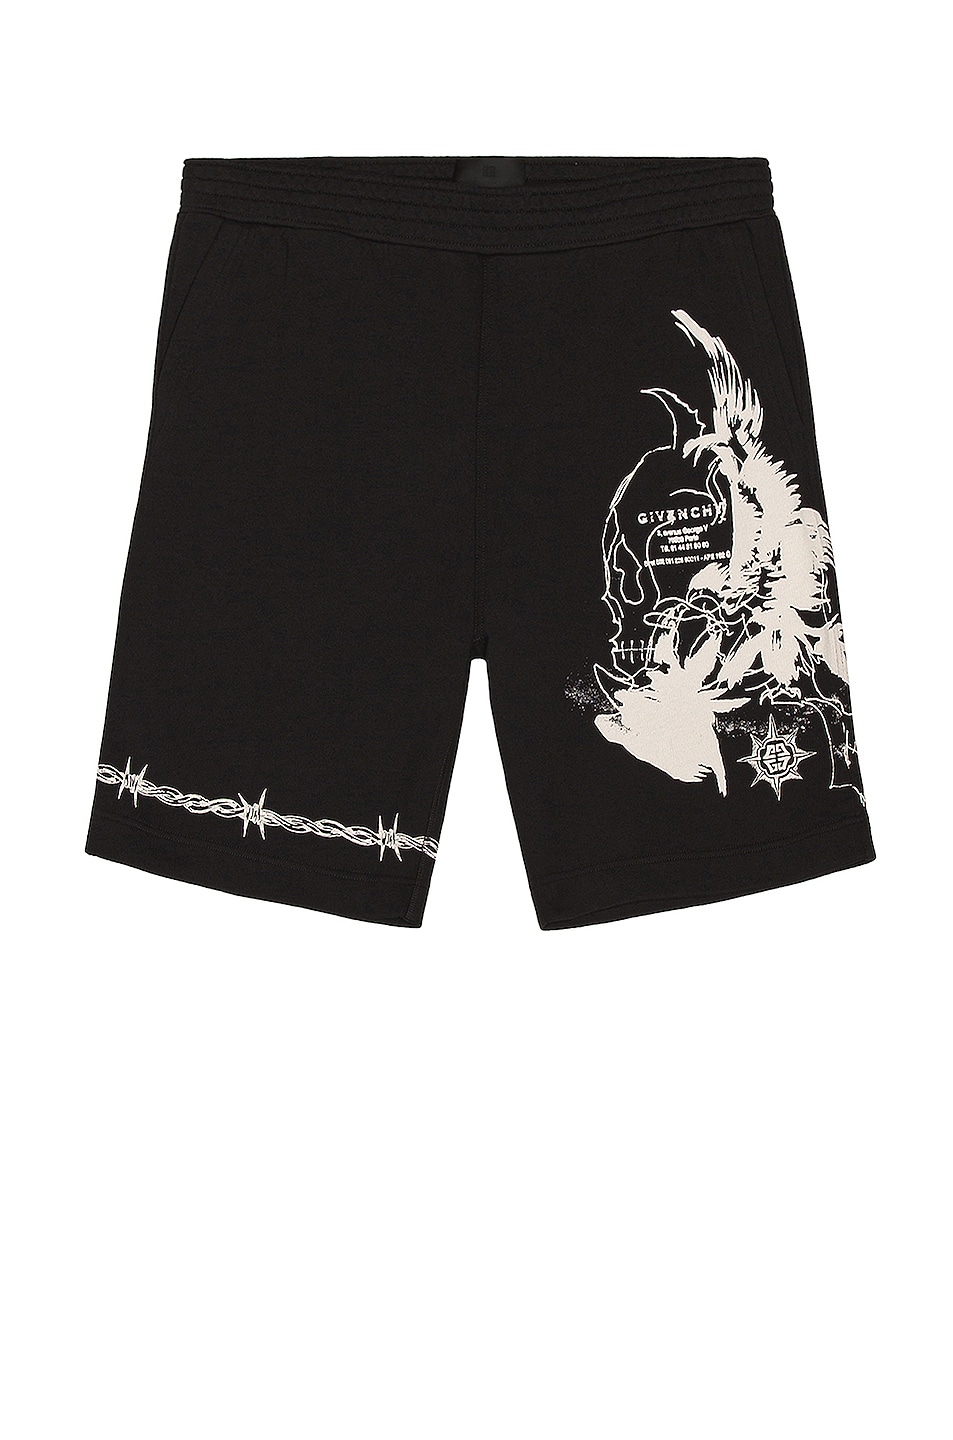 Image 1 of Givenchy Reaper Sweatshort in Black